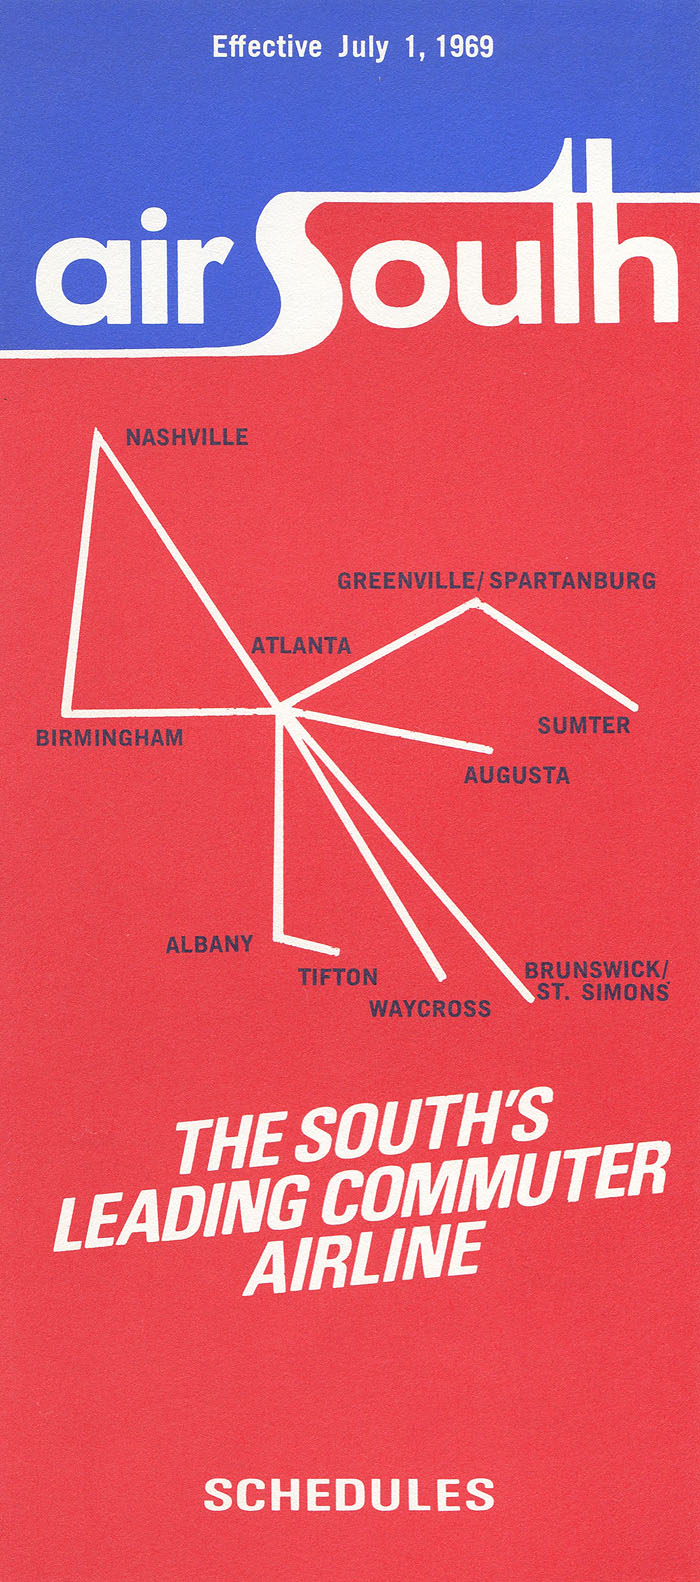 Air South timetable cover July 1, 1969